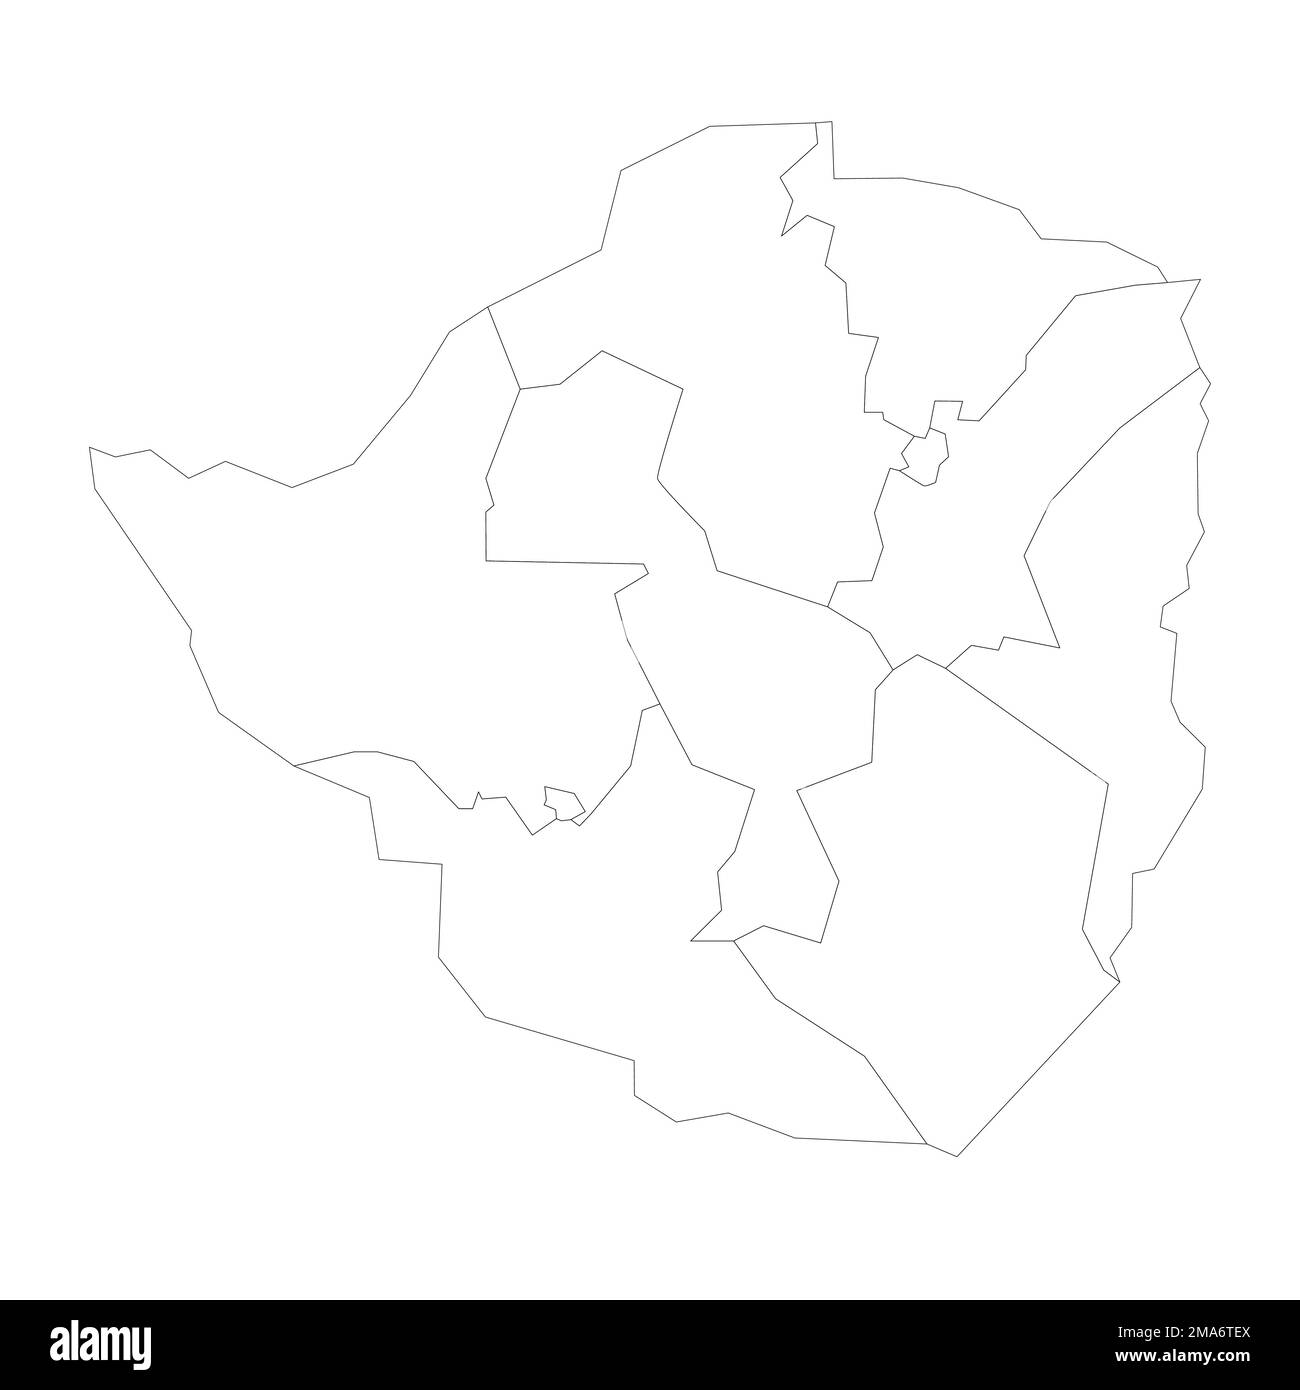 Zimbabwe political map of administrative divisions Stock Vector